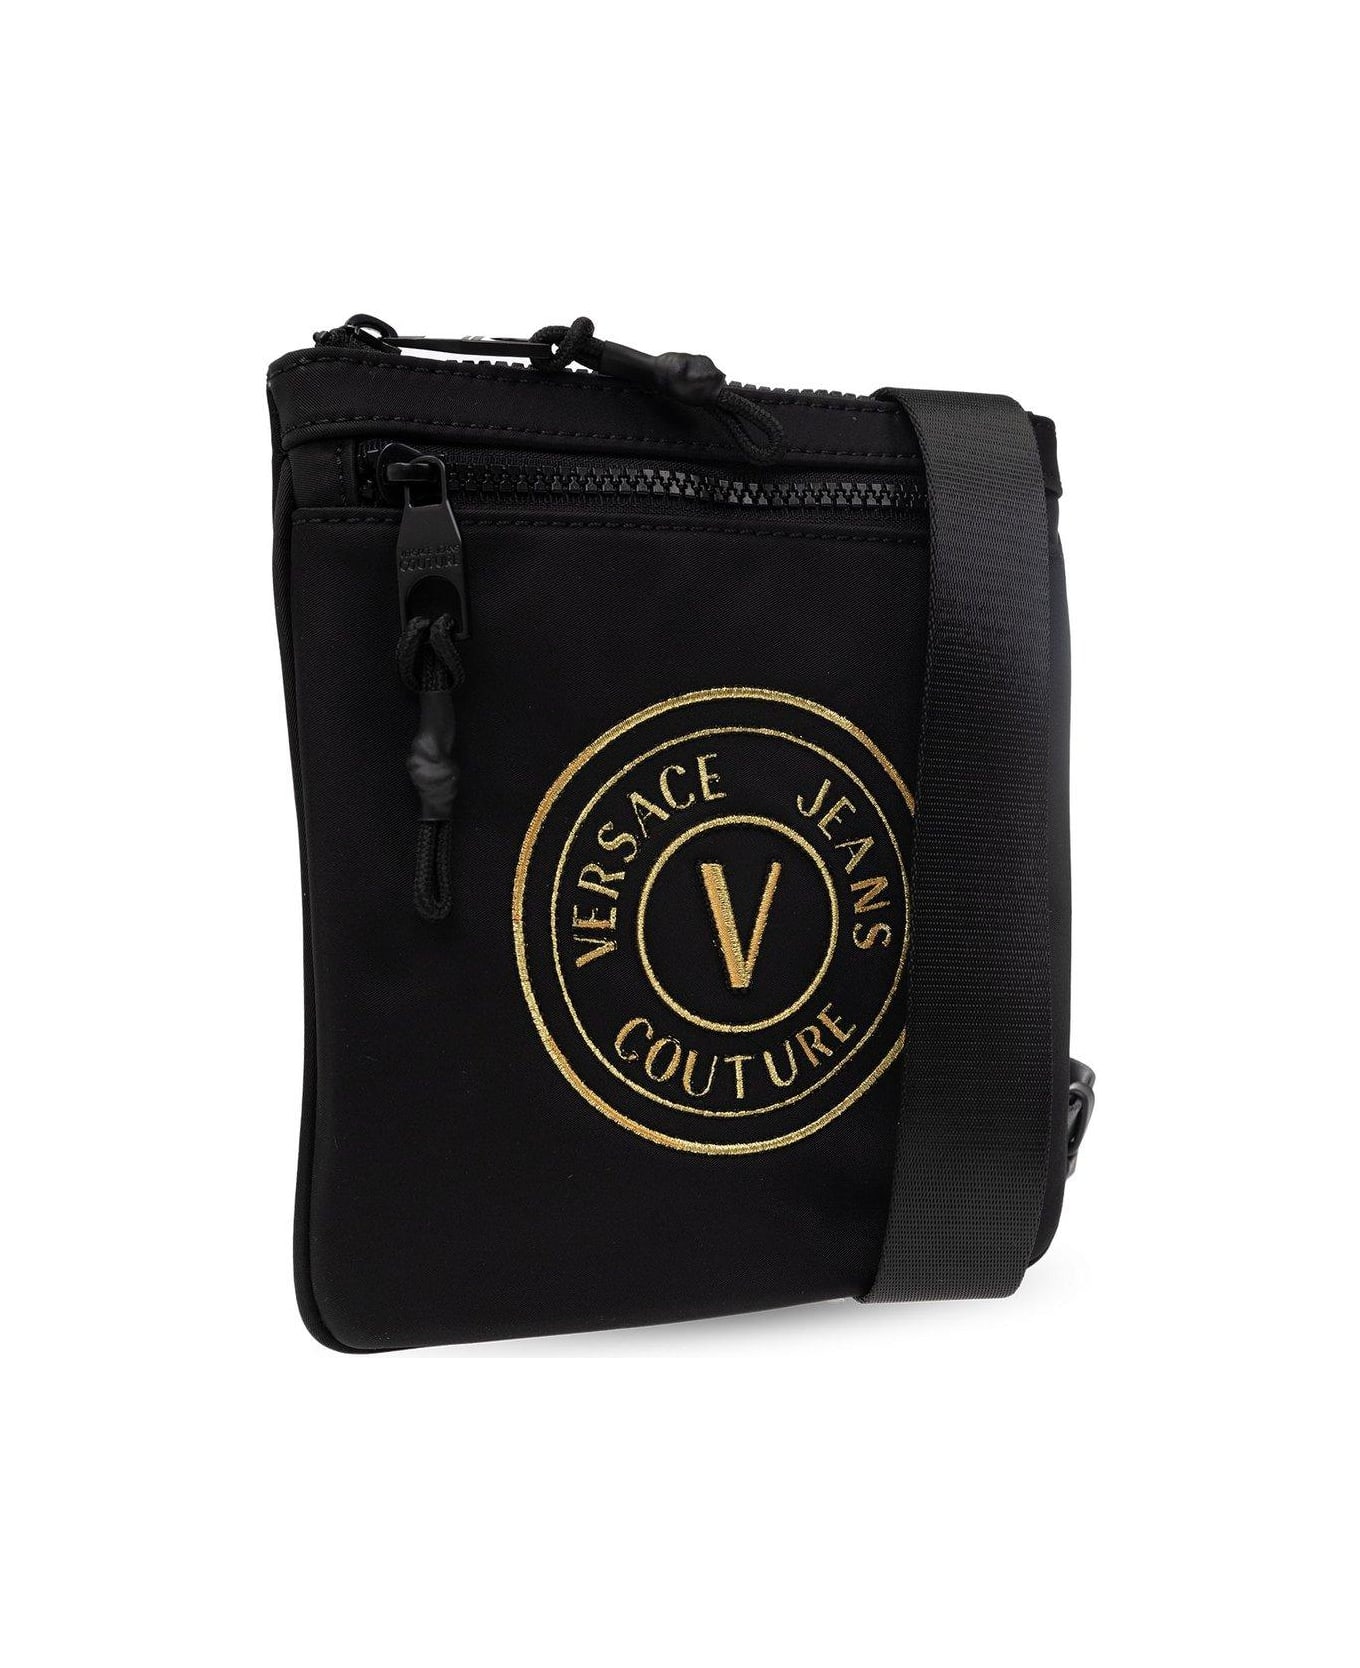 Versace Jeans Couture Logo Embroidered Zipped Messenger Bag - Black